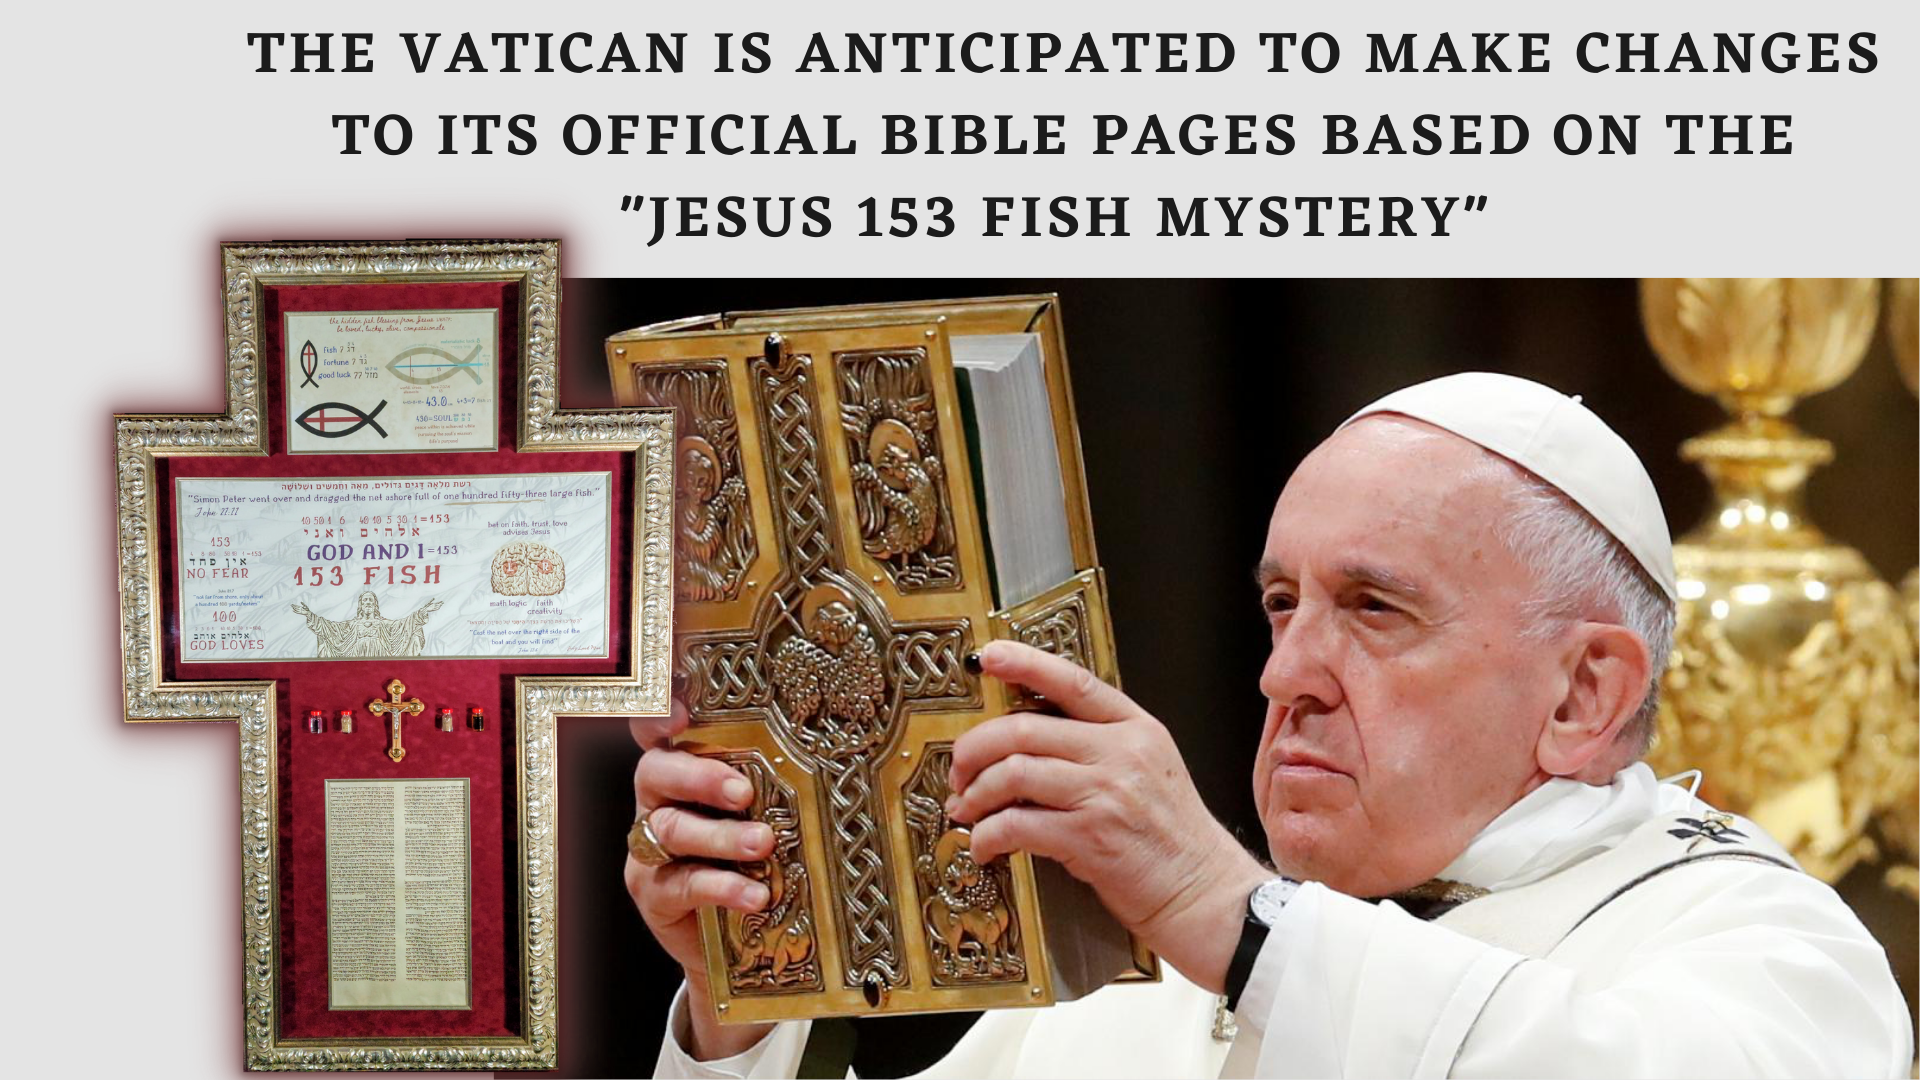 THE VATICAN IS ANTICIPATED TO MAKE CHANGES TO ITS OFFICIAL BIBLE PAGES BASED ON THE "JESUS 153 FISH MYSTERY"